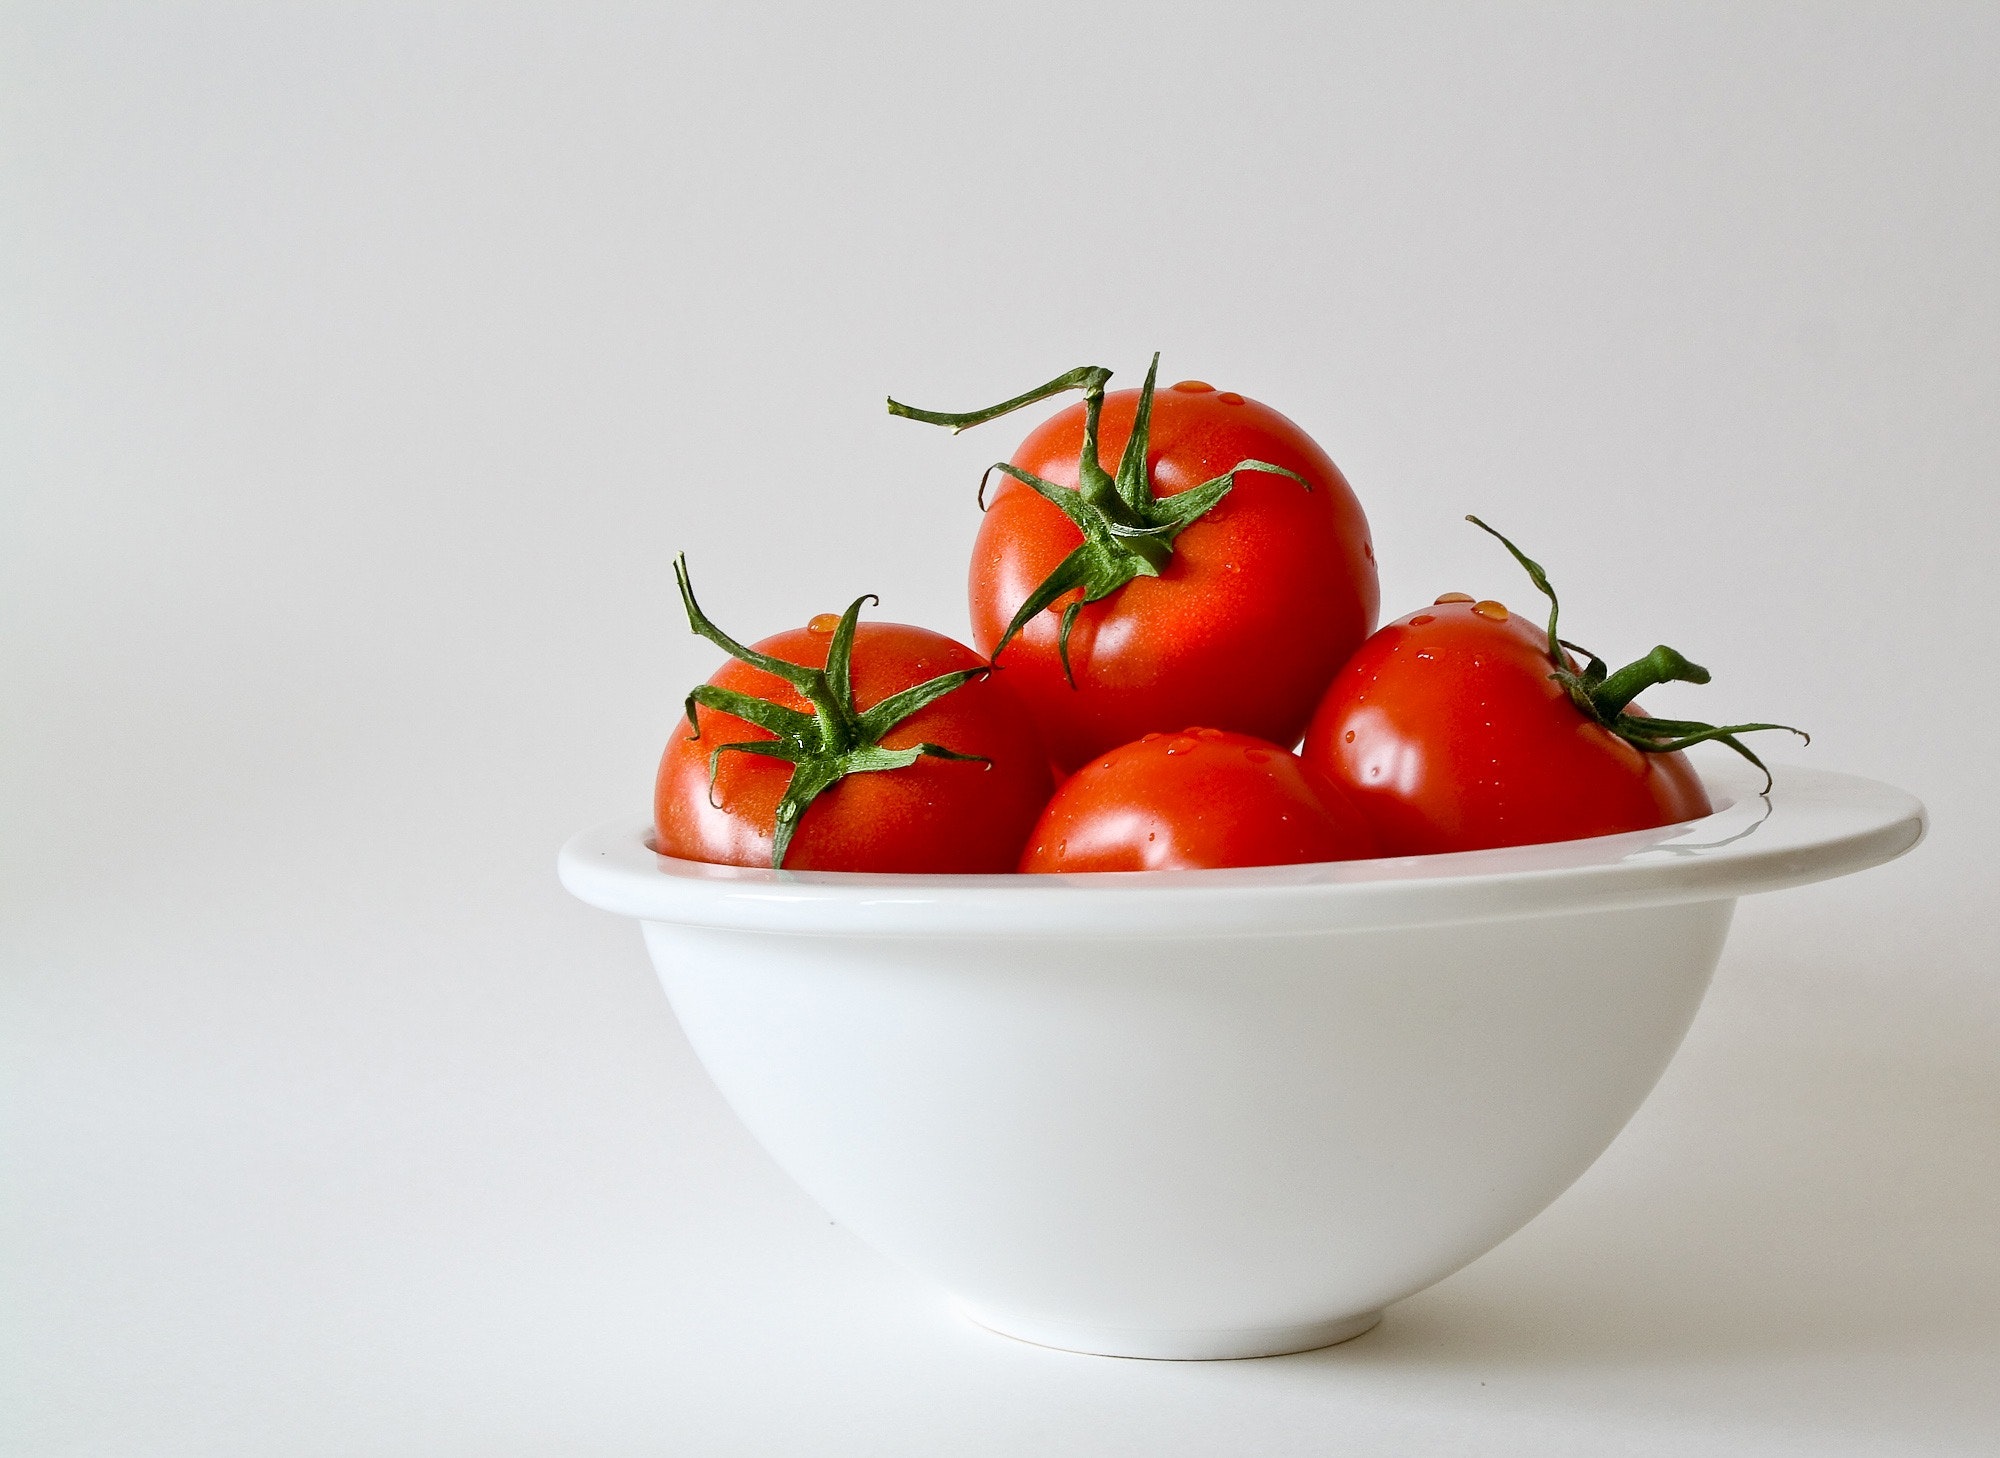 A Simple Guide to Tomato Varieties by Color